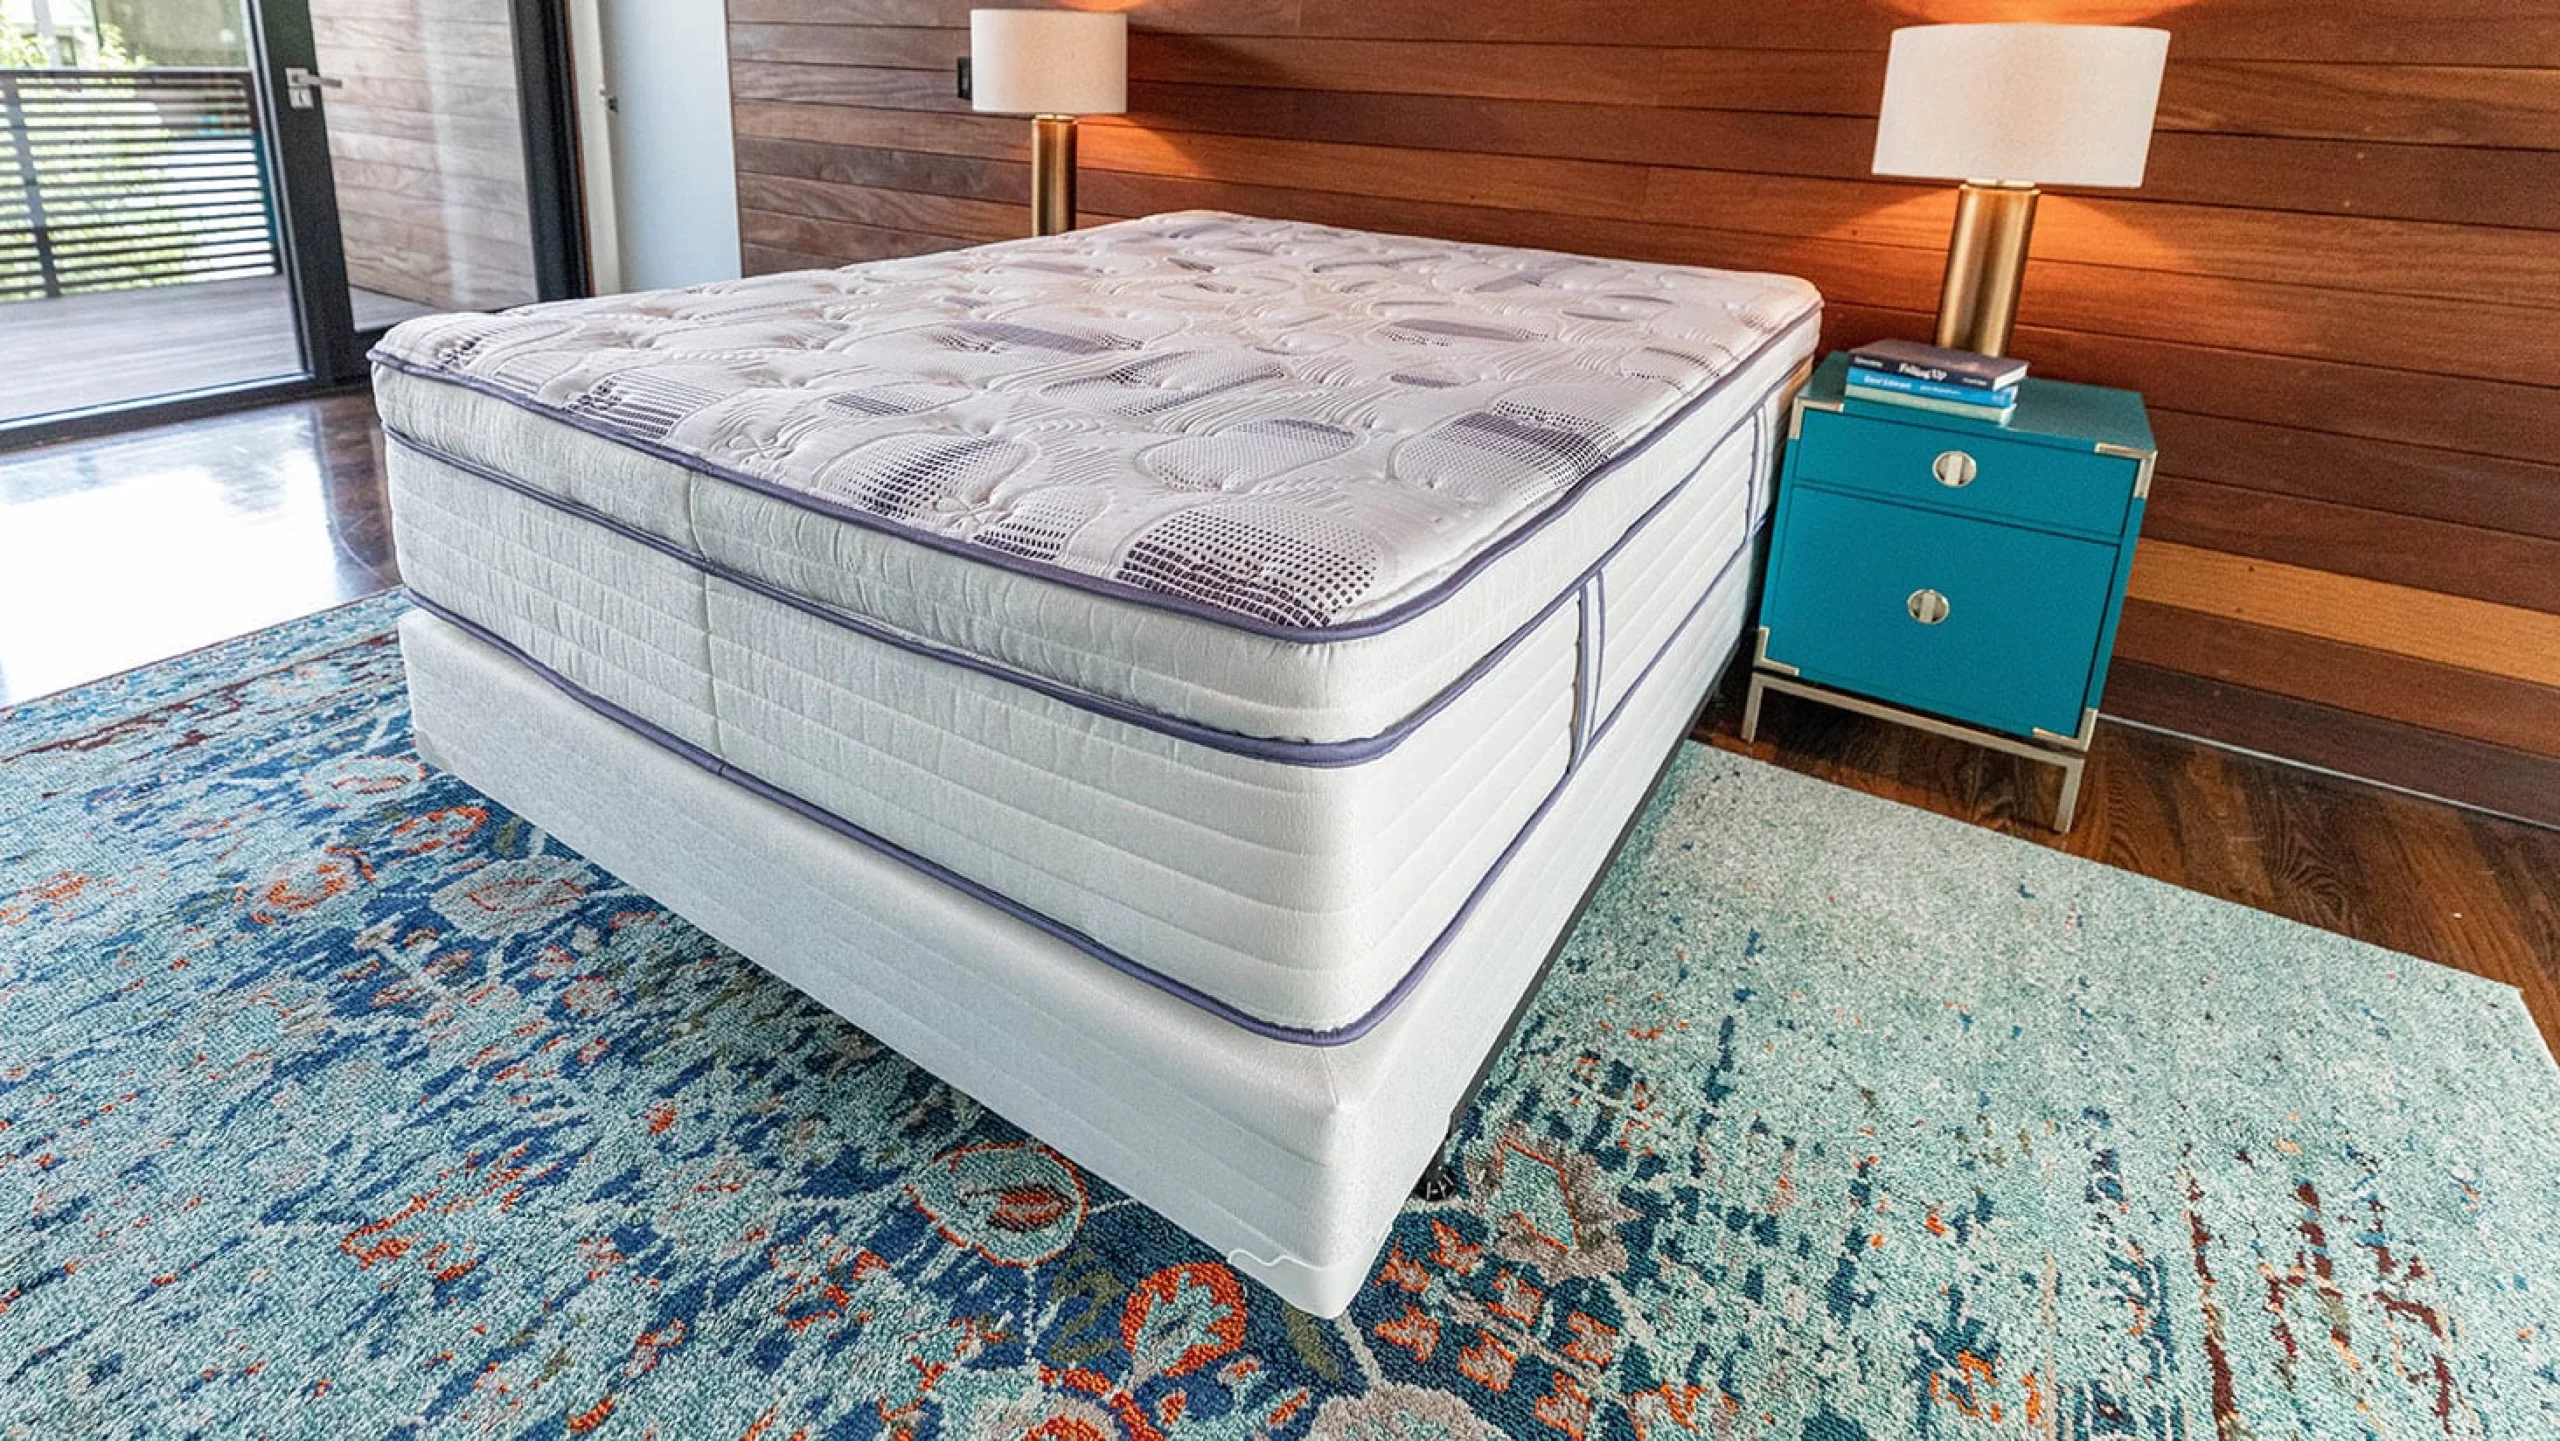 Bel Air ET Deluxe mattress angled view